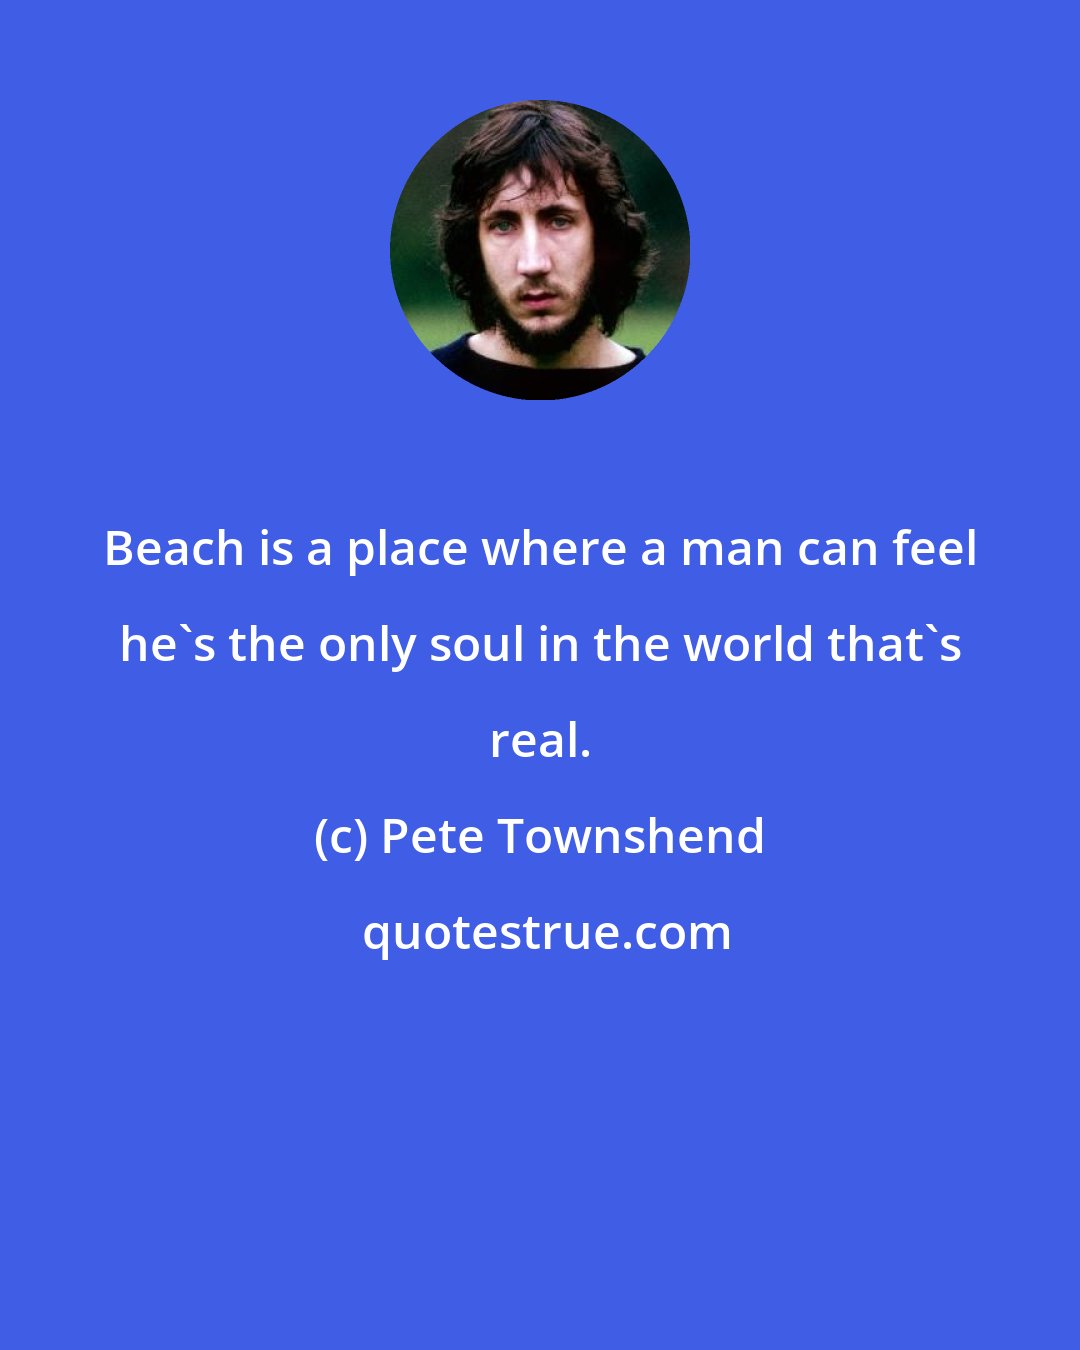 Pete Townshend: Beach is a place where a man can feel he's the only soul in the world that's real.